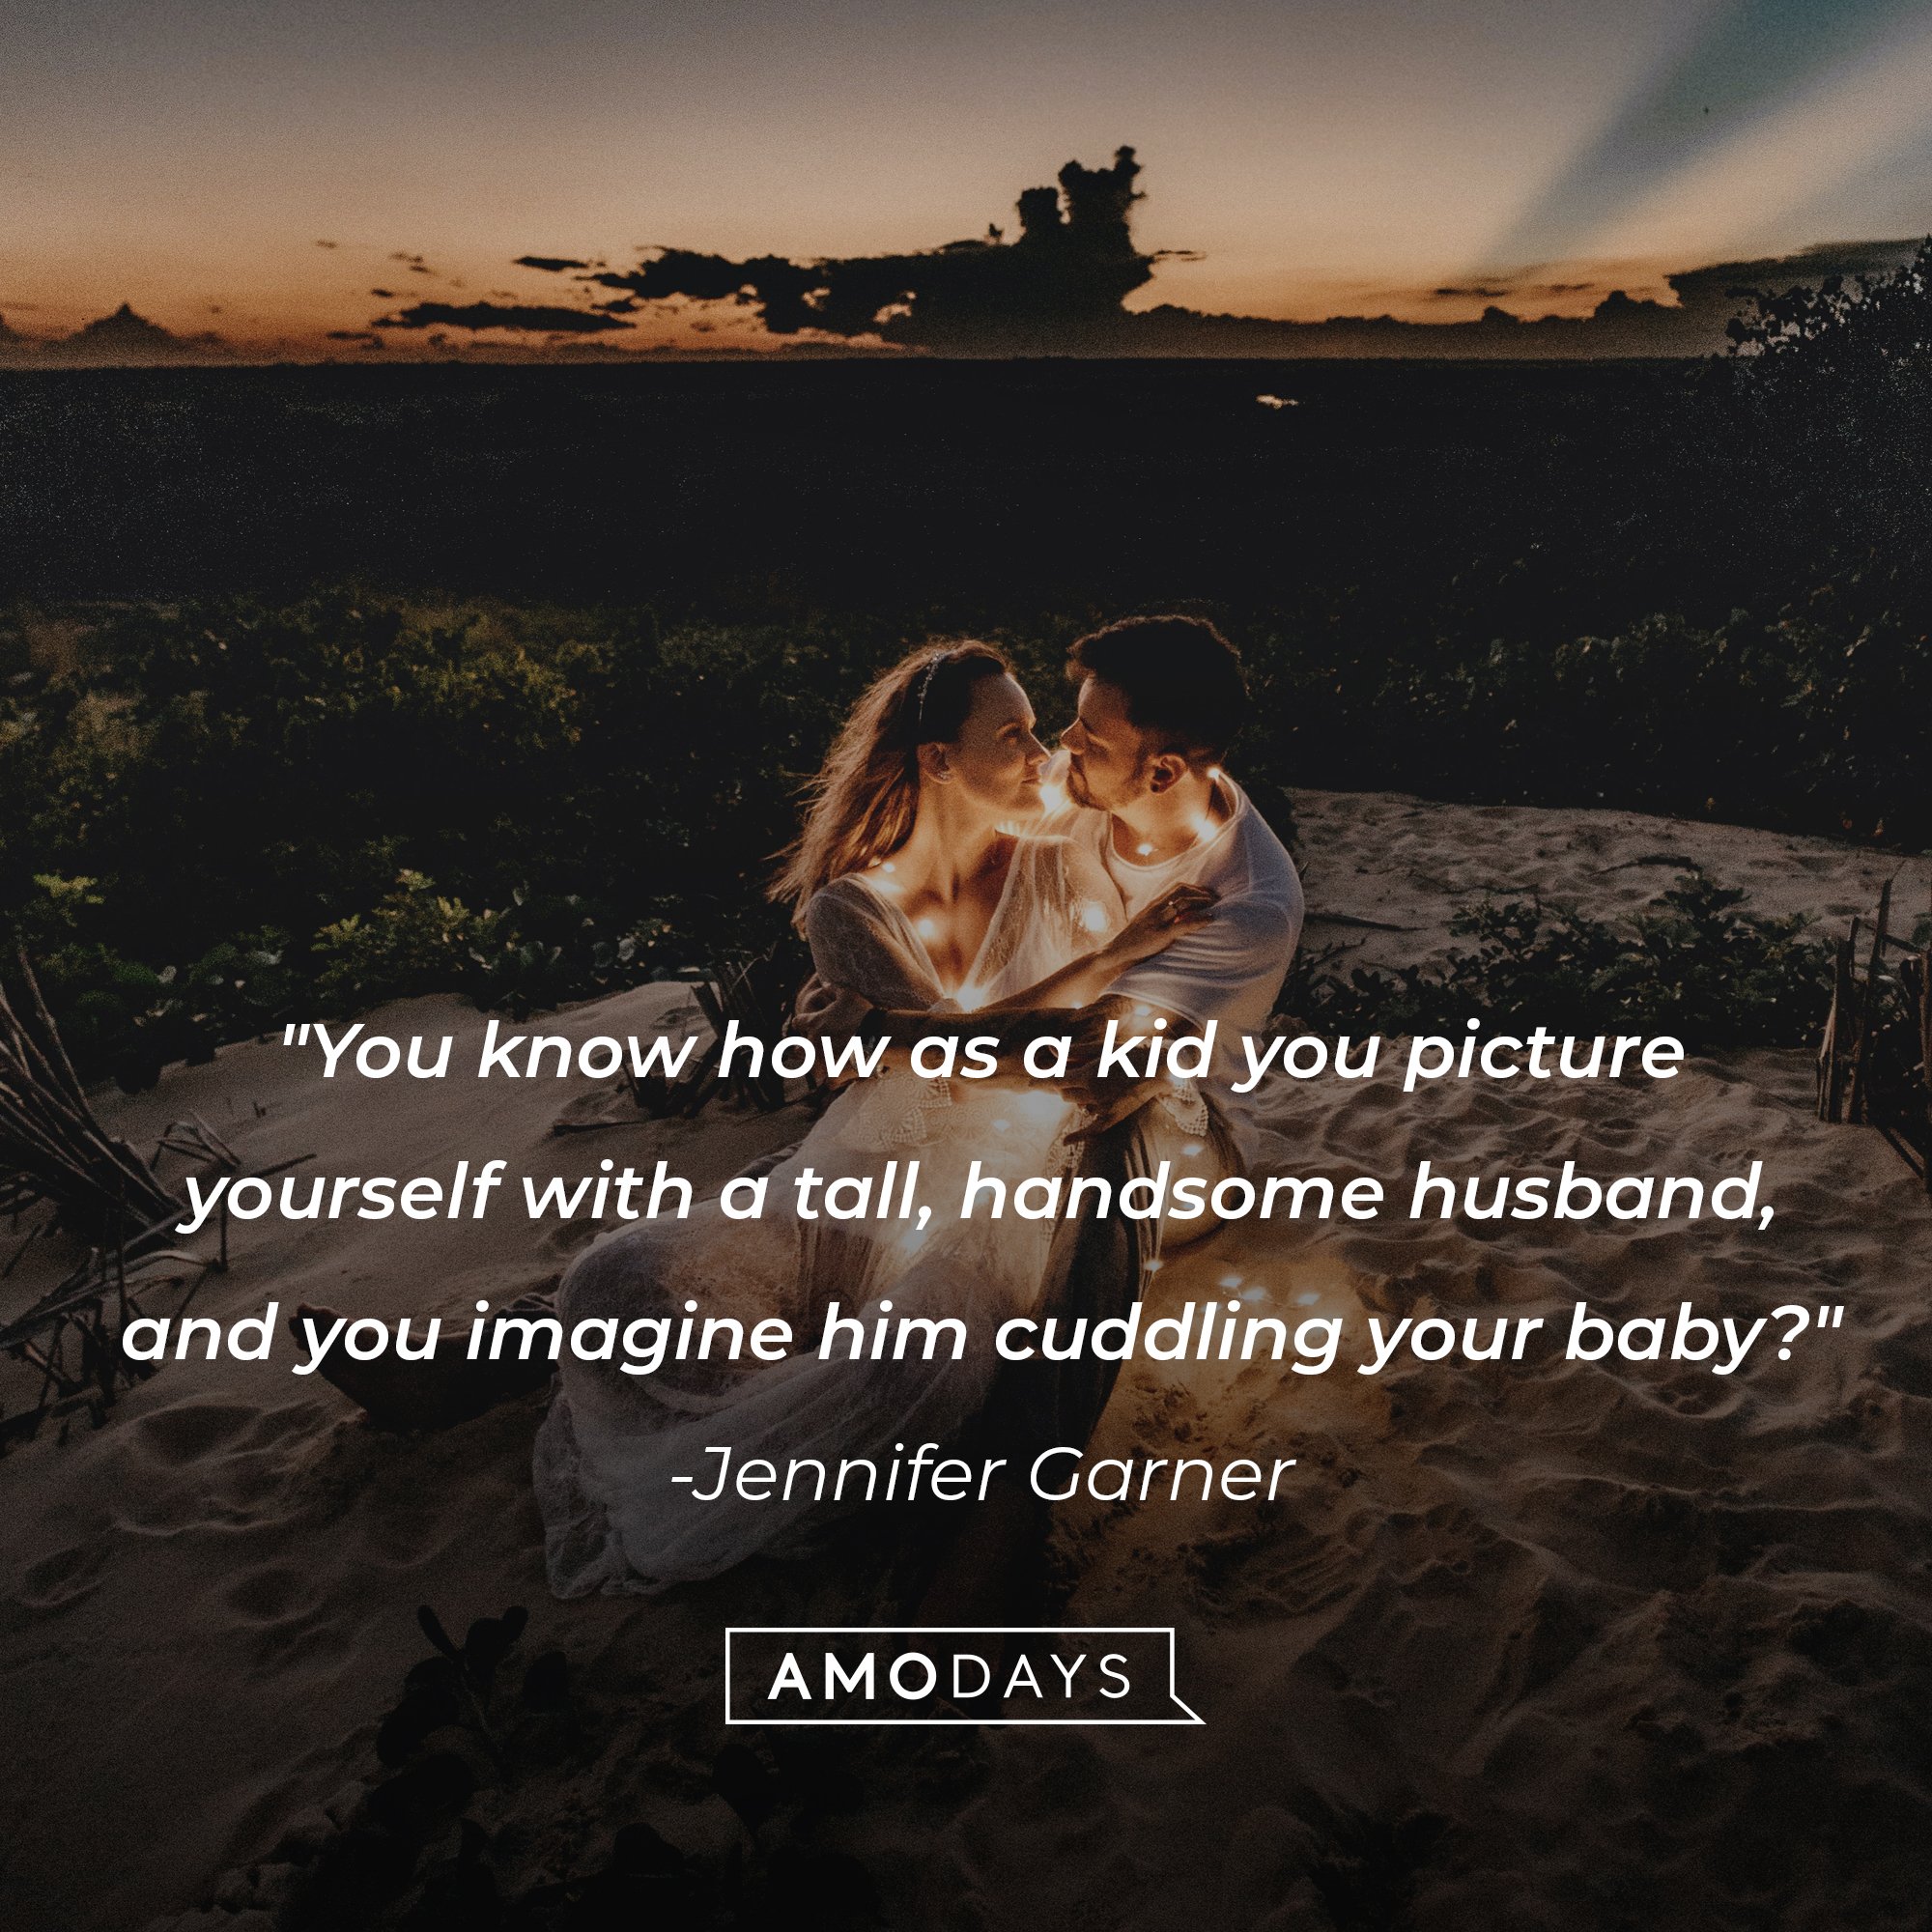 Jennifer Garner's quote: "You know how as a kid you picture yourself with a tall, handsome husband, and you imagine him cuddling your baby?" | Image: AmoDays